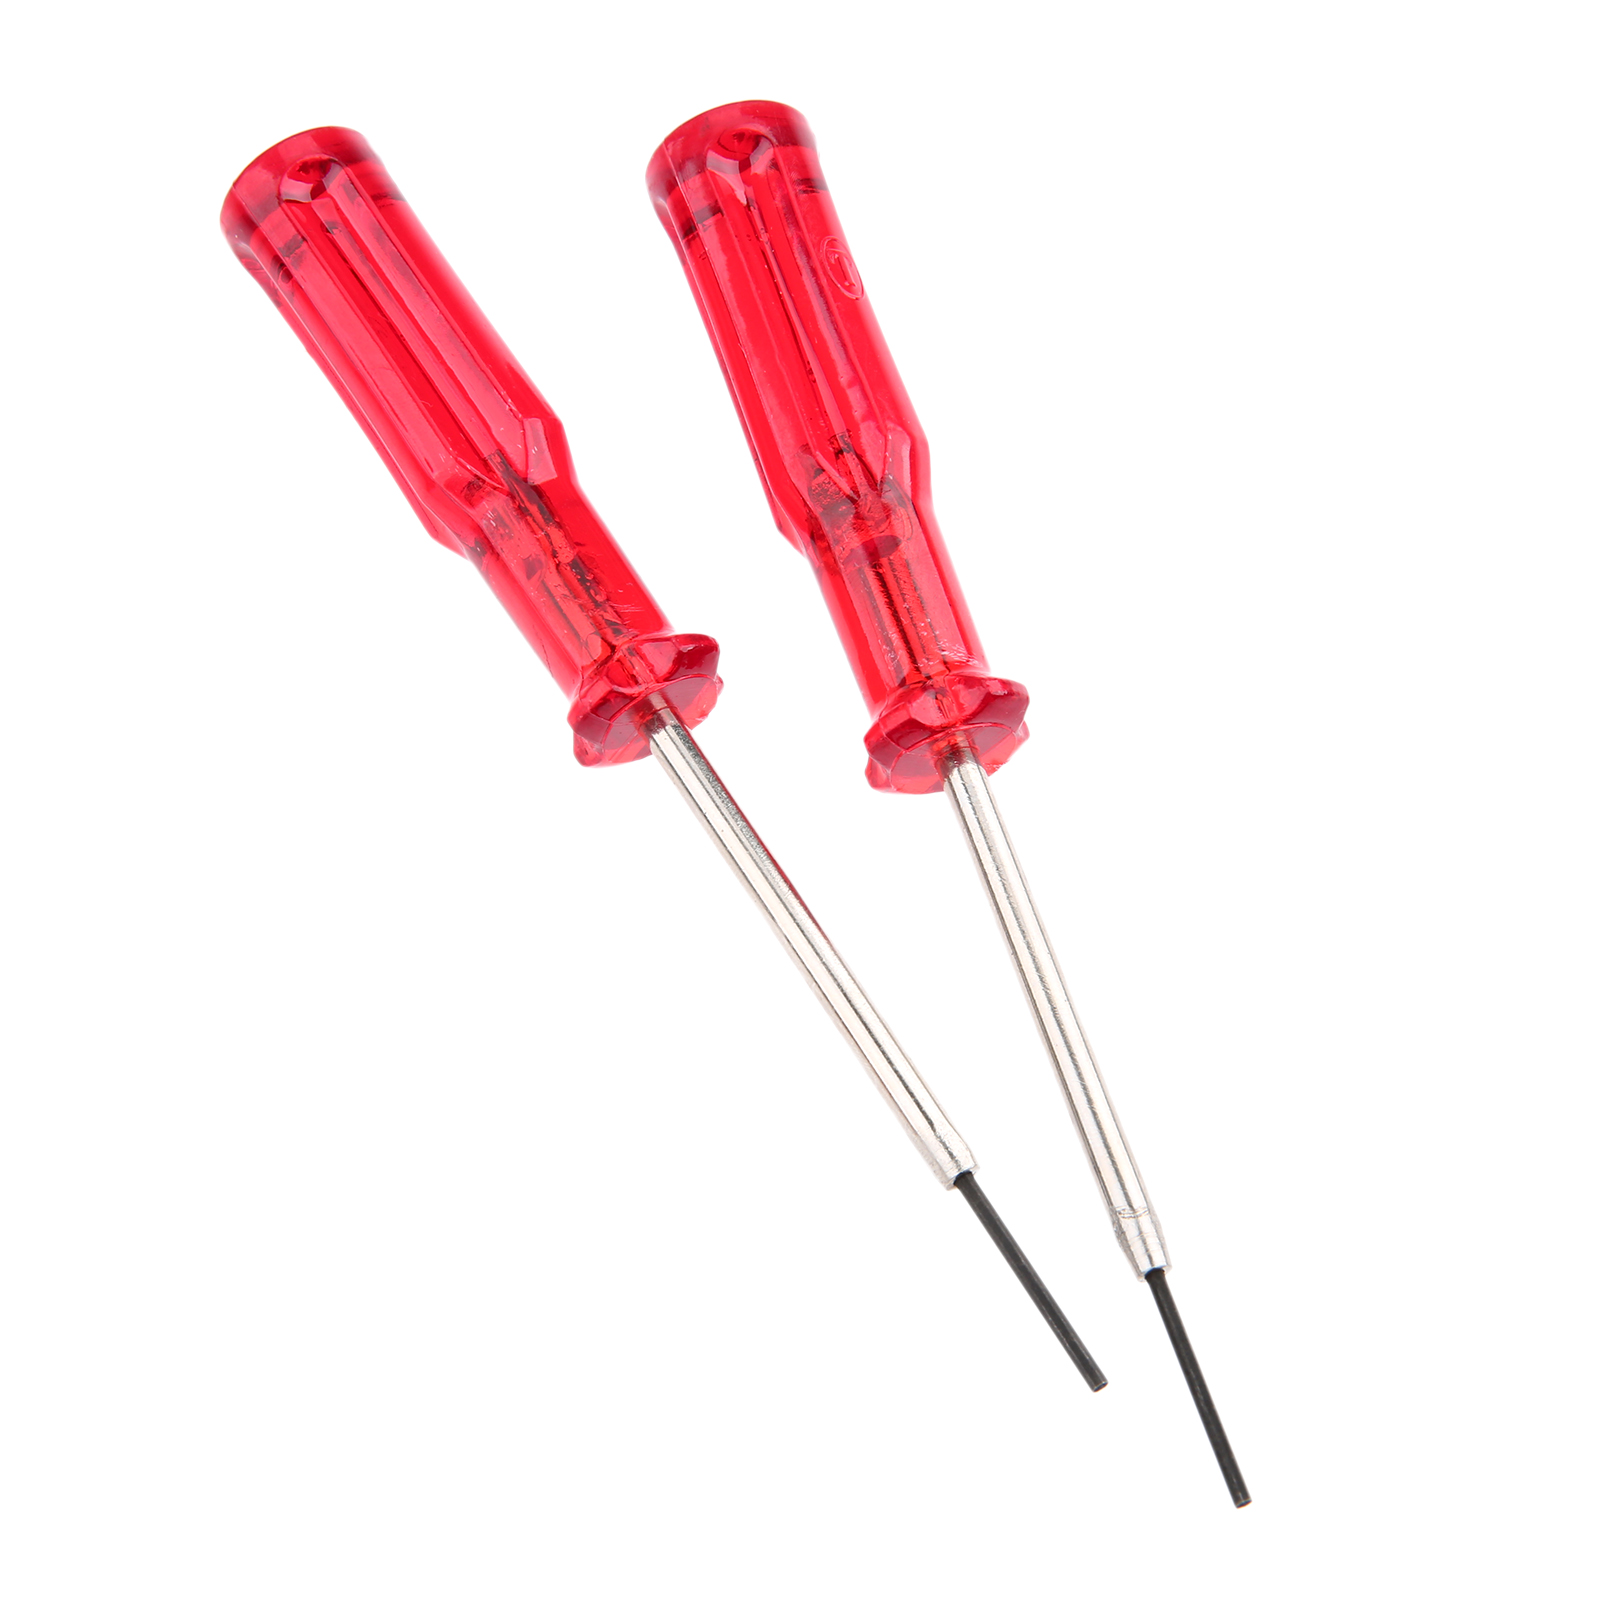 2Pcs 1.5mm/1.6mm Industrial Overlock Sewing Machine Inner Six Angle Screwdrivers Sewing Tools & Accessory Hexagonal Screw Driver